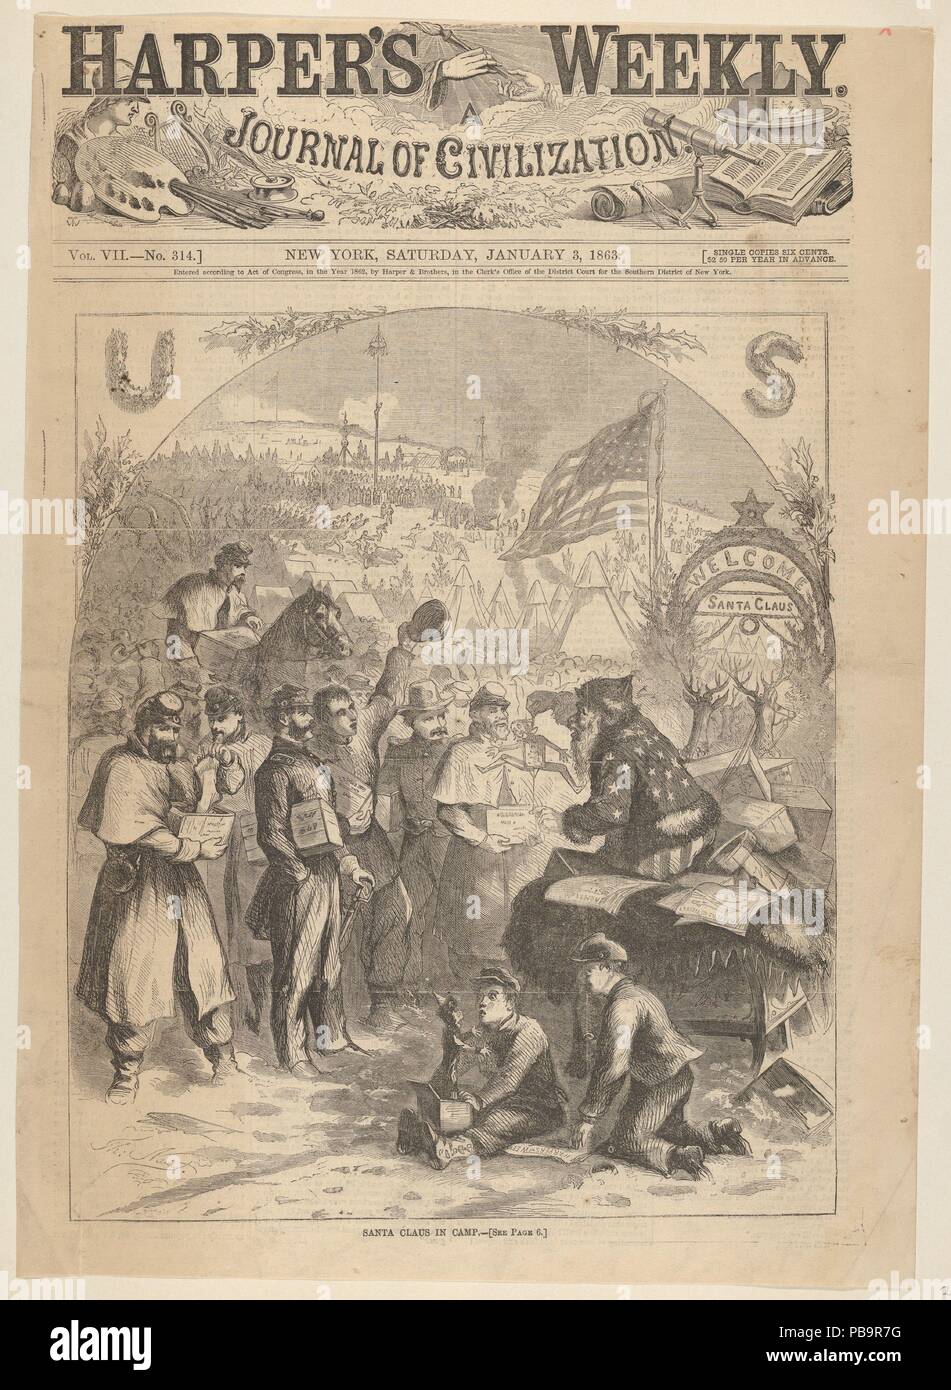 Santa Claus in Camp (from Harper's Weekly). Artist: Thomas Nast (American (born Germany), Landau 1840-1902 Guayaquil). Dimensions: Sheet: 14 3/4 × 10 9/16 in. (37.4 × 26.8 cm). Publisher: Harper's Weekly (American, 1857-1916). Date: January 3, 1863.  Nast's image was published in the 1862 Christmas issue of Harper's Weekly, during days filled with both trials for the Union and rising hope. Santa Claus has arrived by sleigh in a Union army camp to distribute gifts. This was the moment that Nast conceived and introduced our modern image of Santa Claus. Combining European traditions of St. Nichol Stock Photo